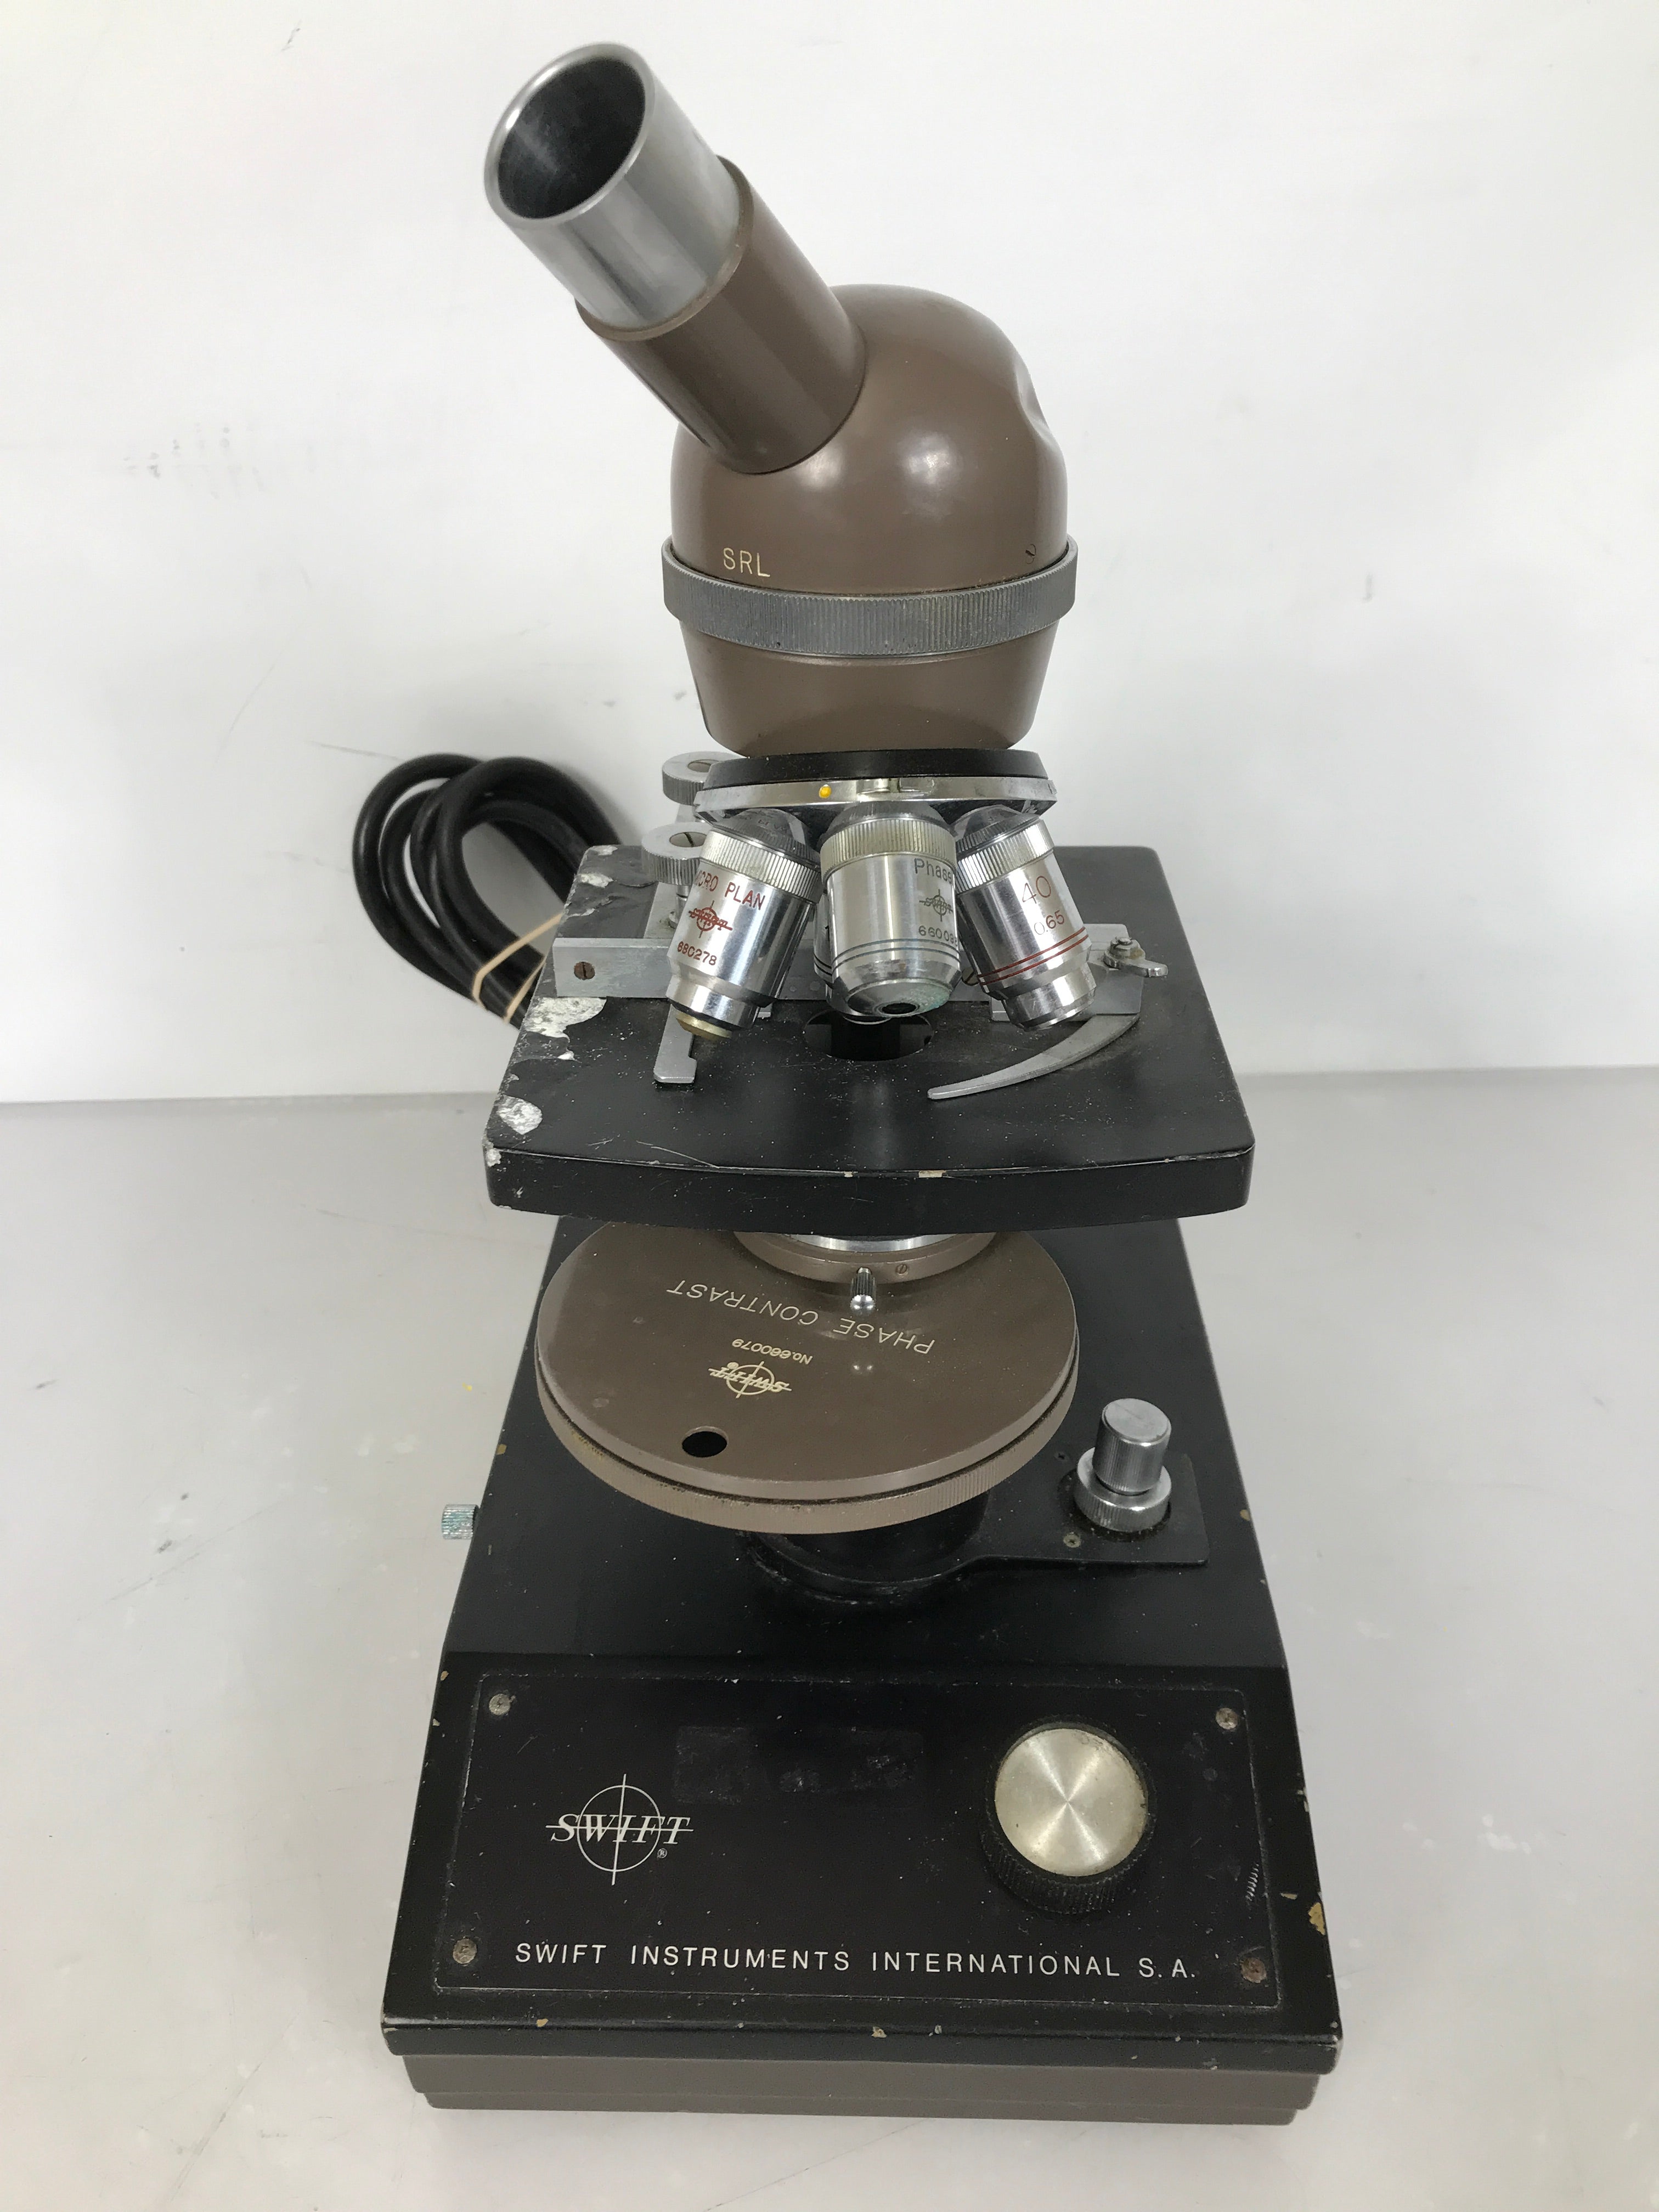 Swift SRL Microscope w/ 4 Objectives and Phase Contrast *For Parts or Repair*